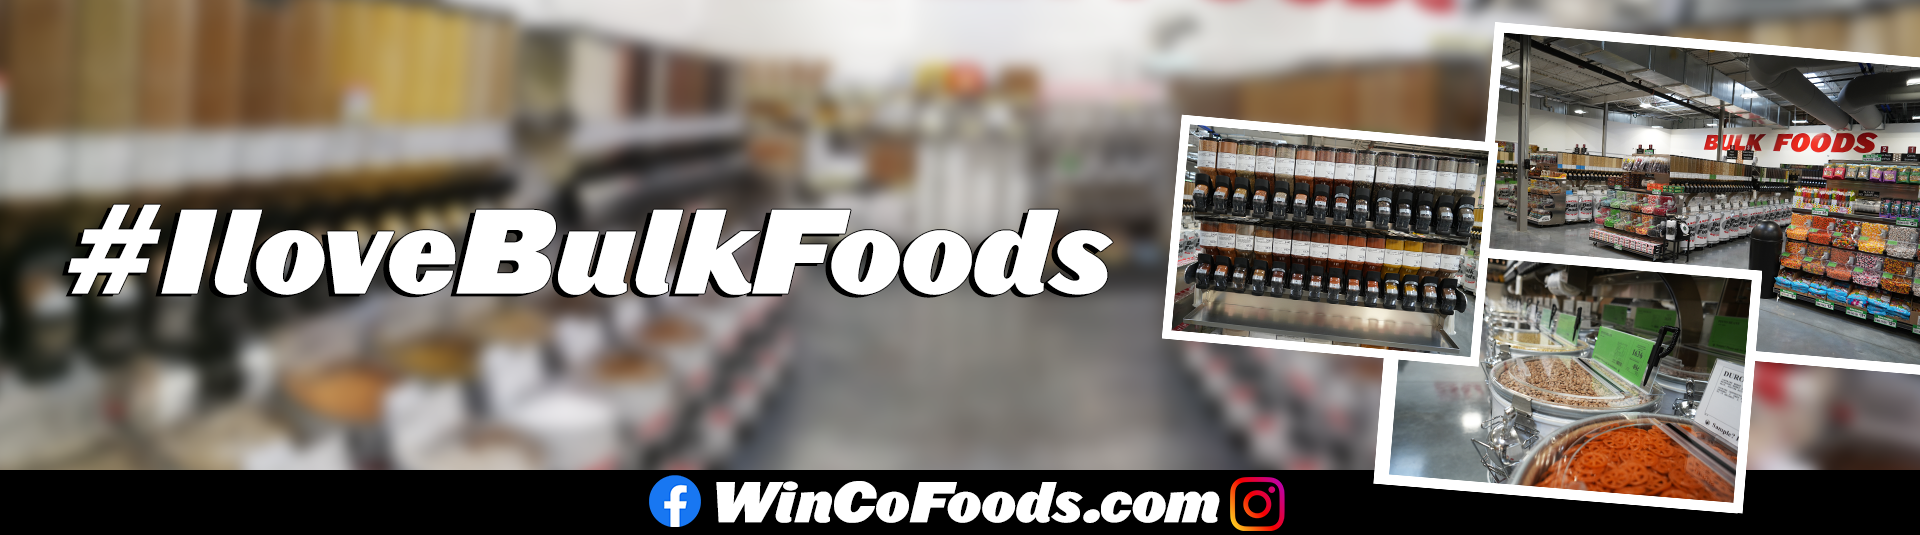 WinCo Bulk Foods Department spices and bins with #IloveBulkFoods, WinCoFoods.com, Facebook and Instagram logo